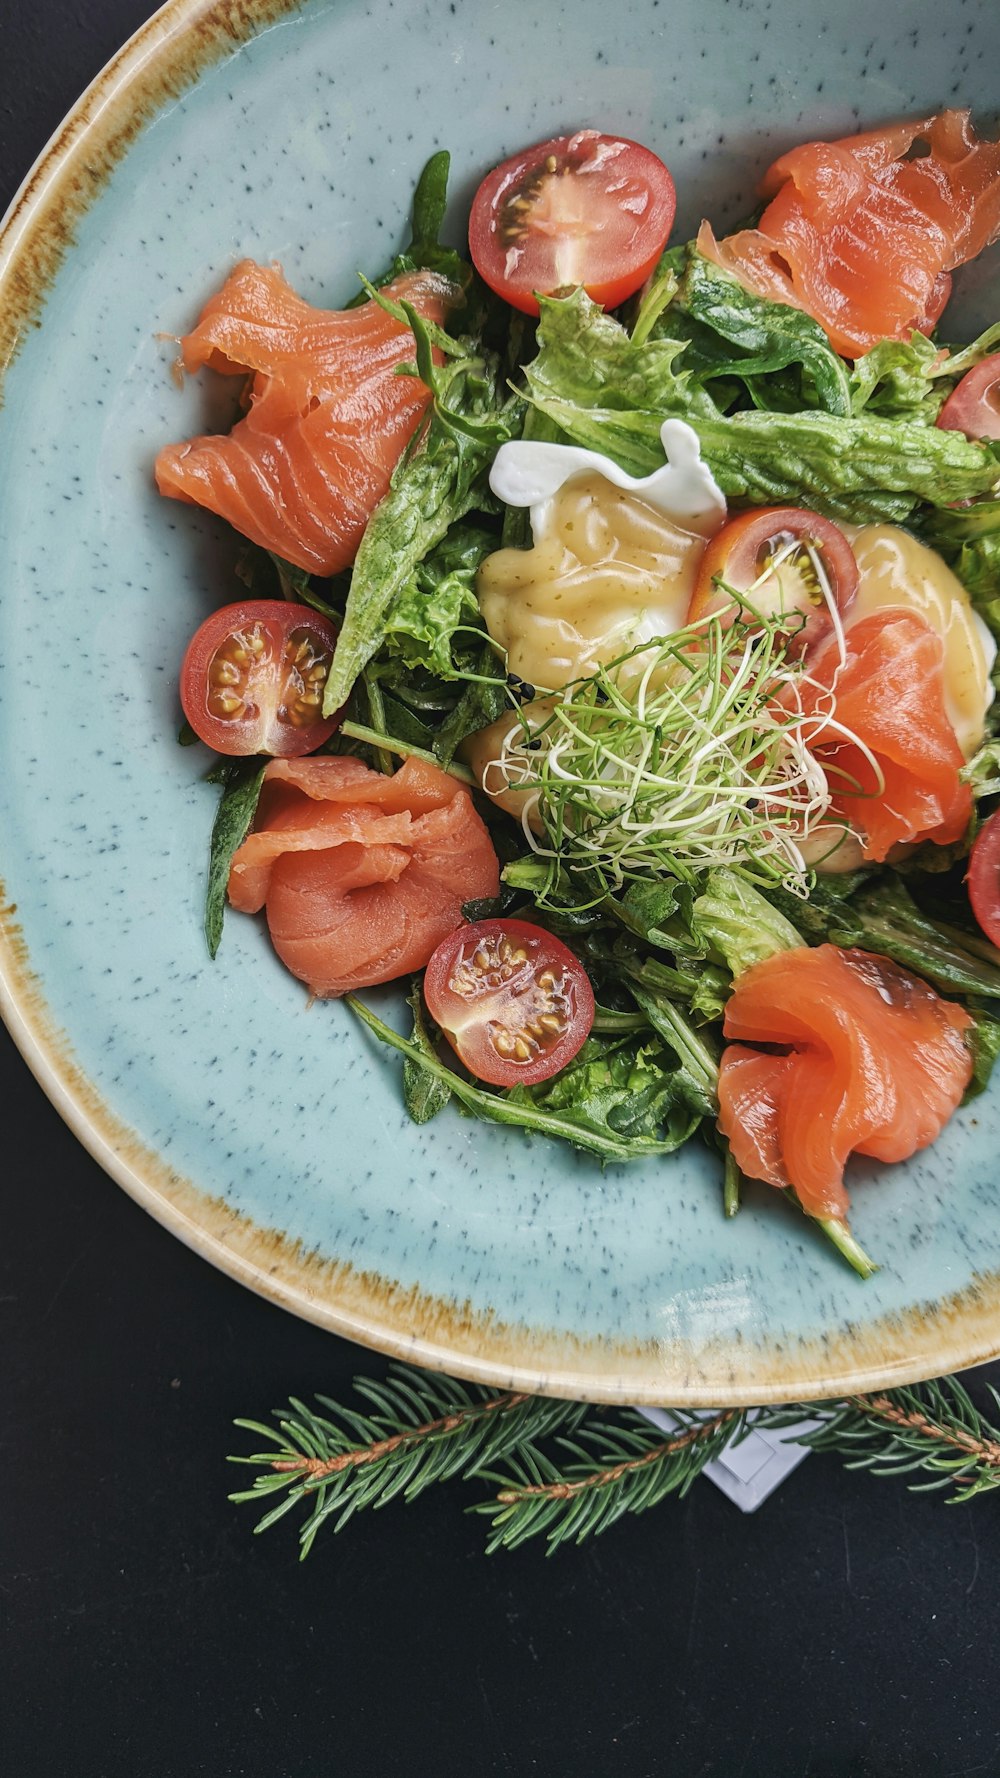 sliced tomato and green vegetable salad on blue and white ceramic plate